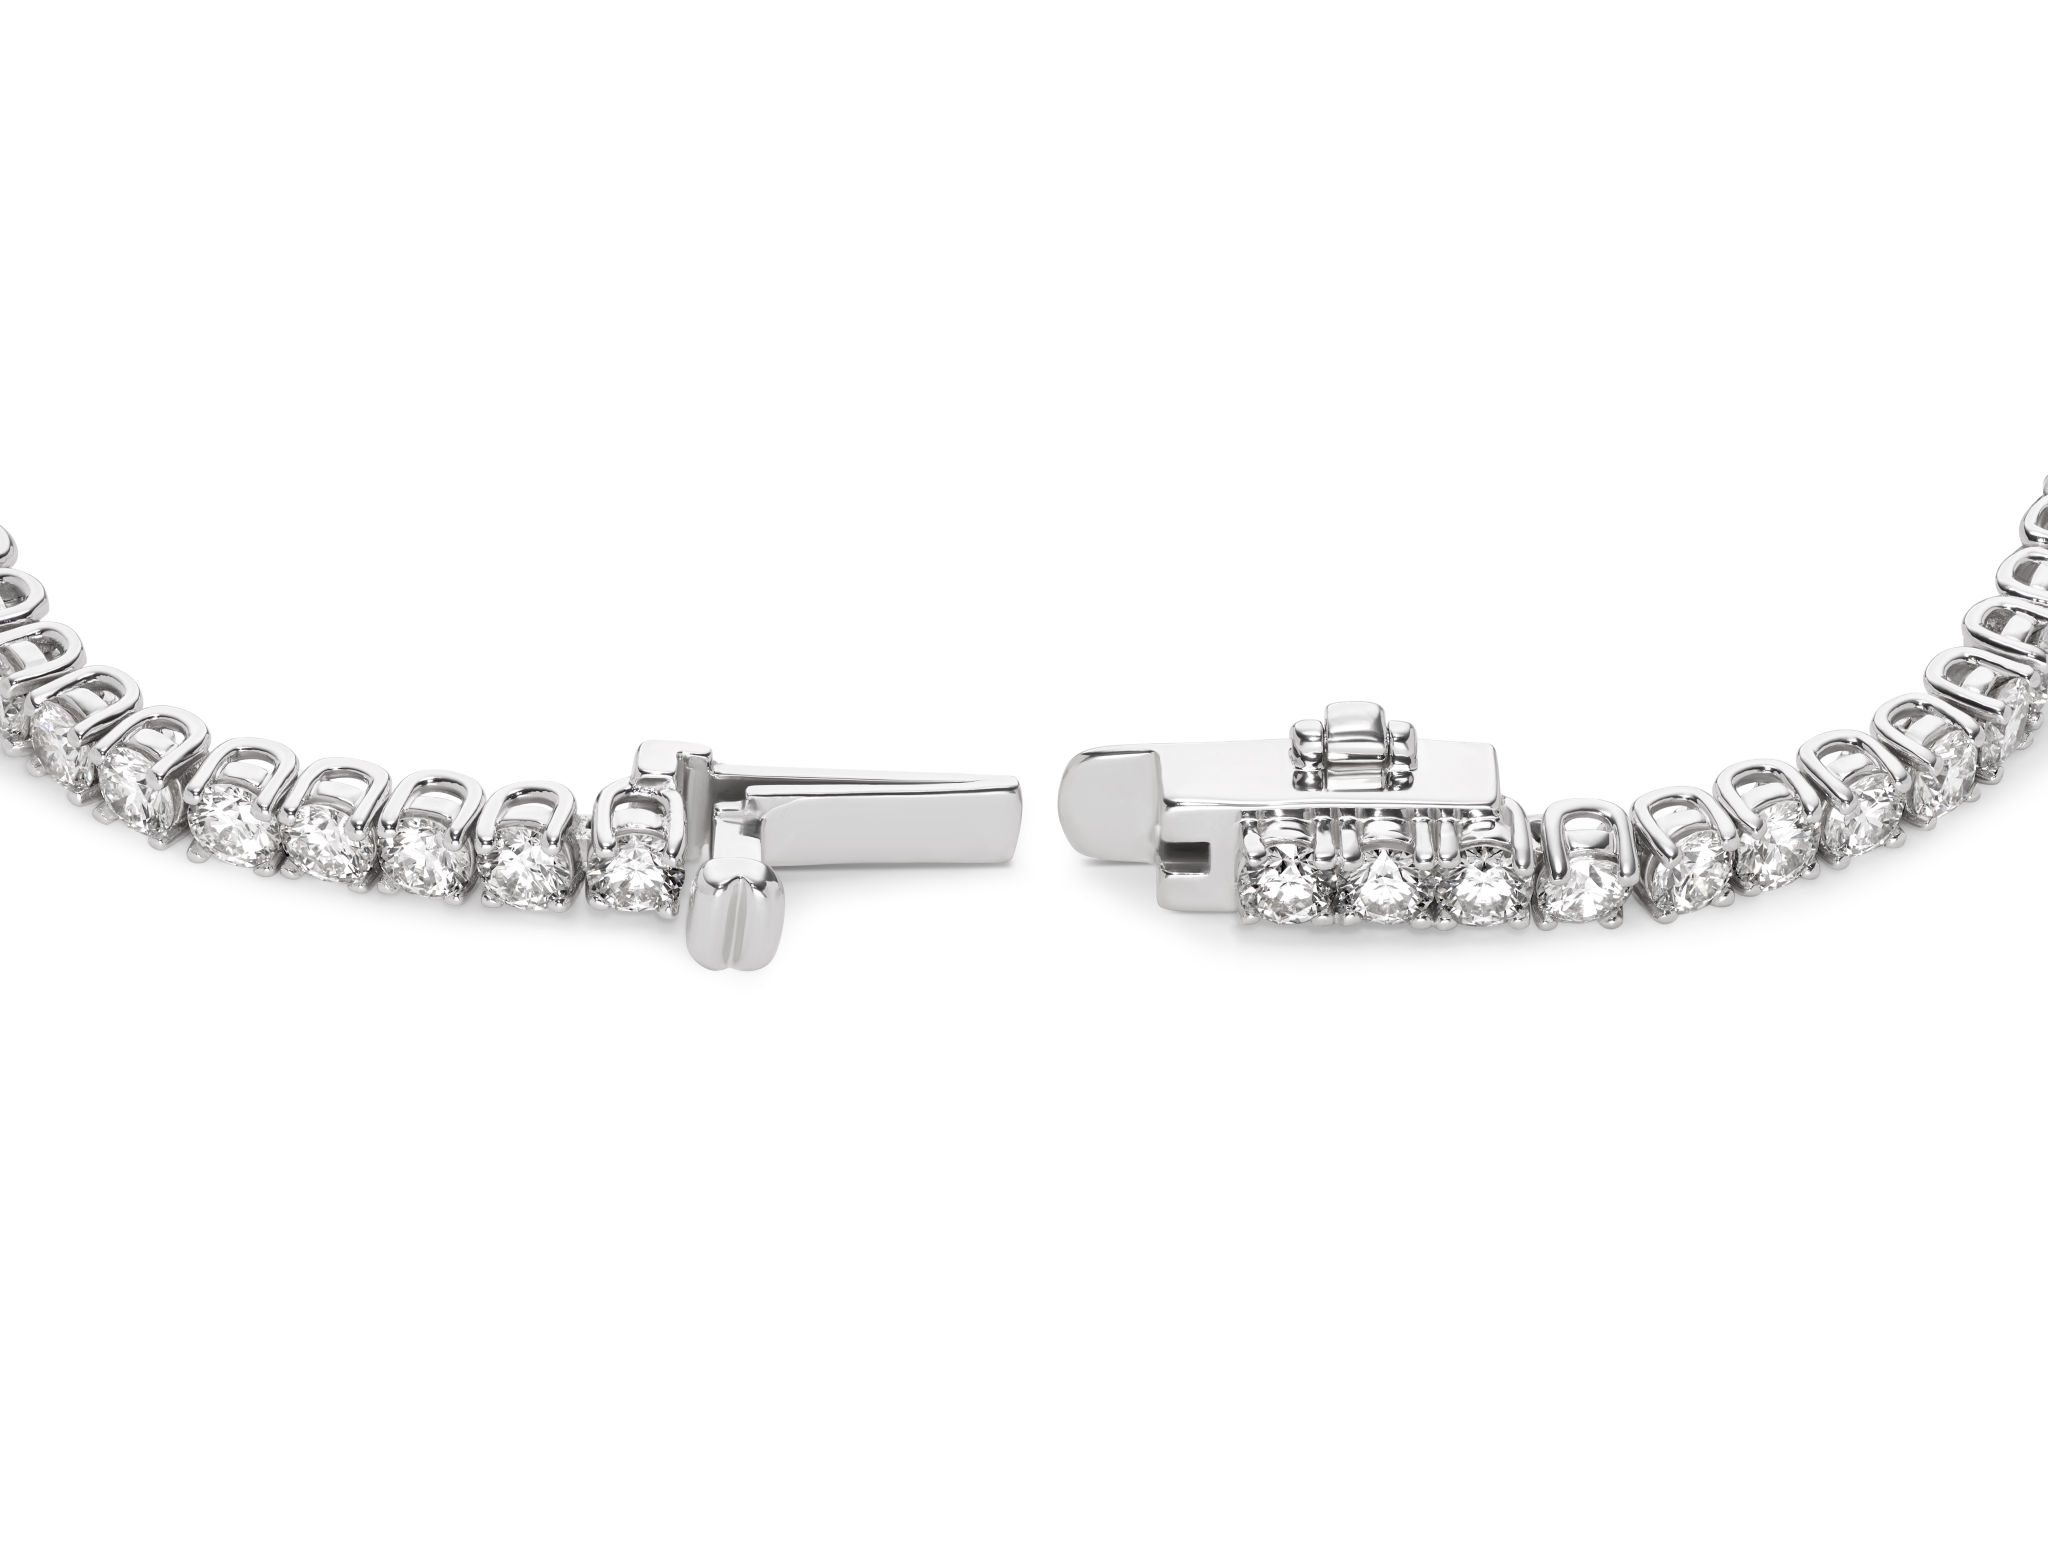 Open clasp image of small tennis bracelet